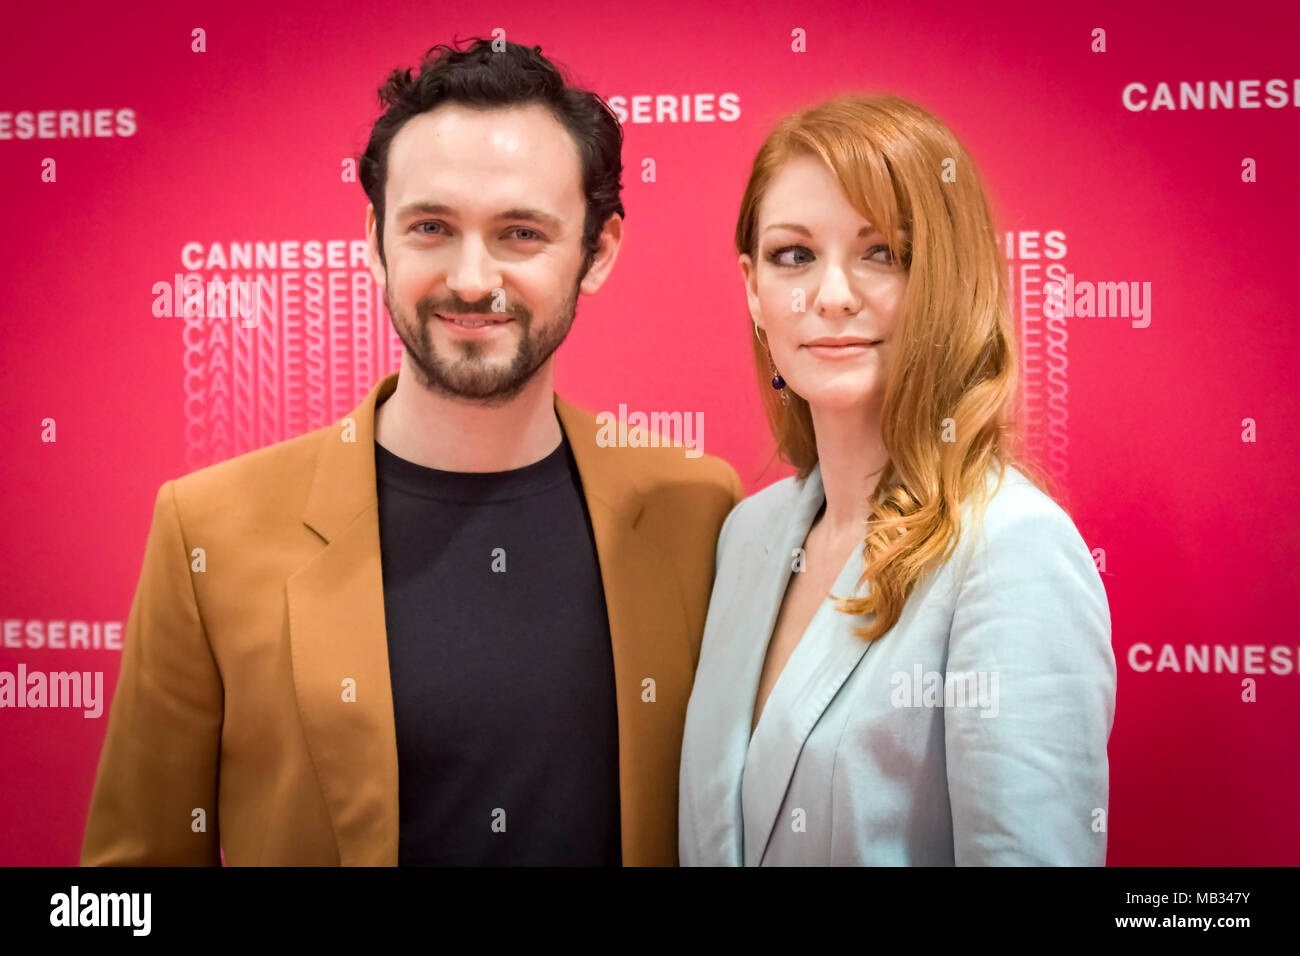 Opening Ceremony of the 1st Cannes Film Festival Canneseries - Georges Blagden Stock Photo